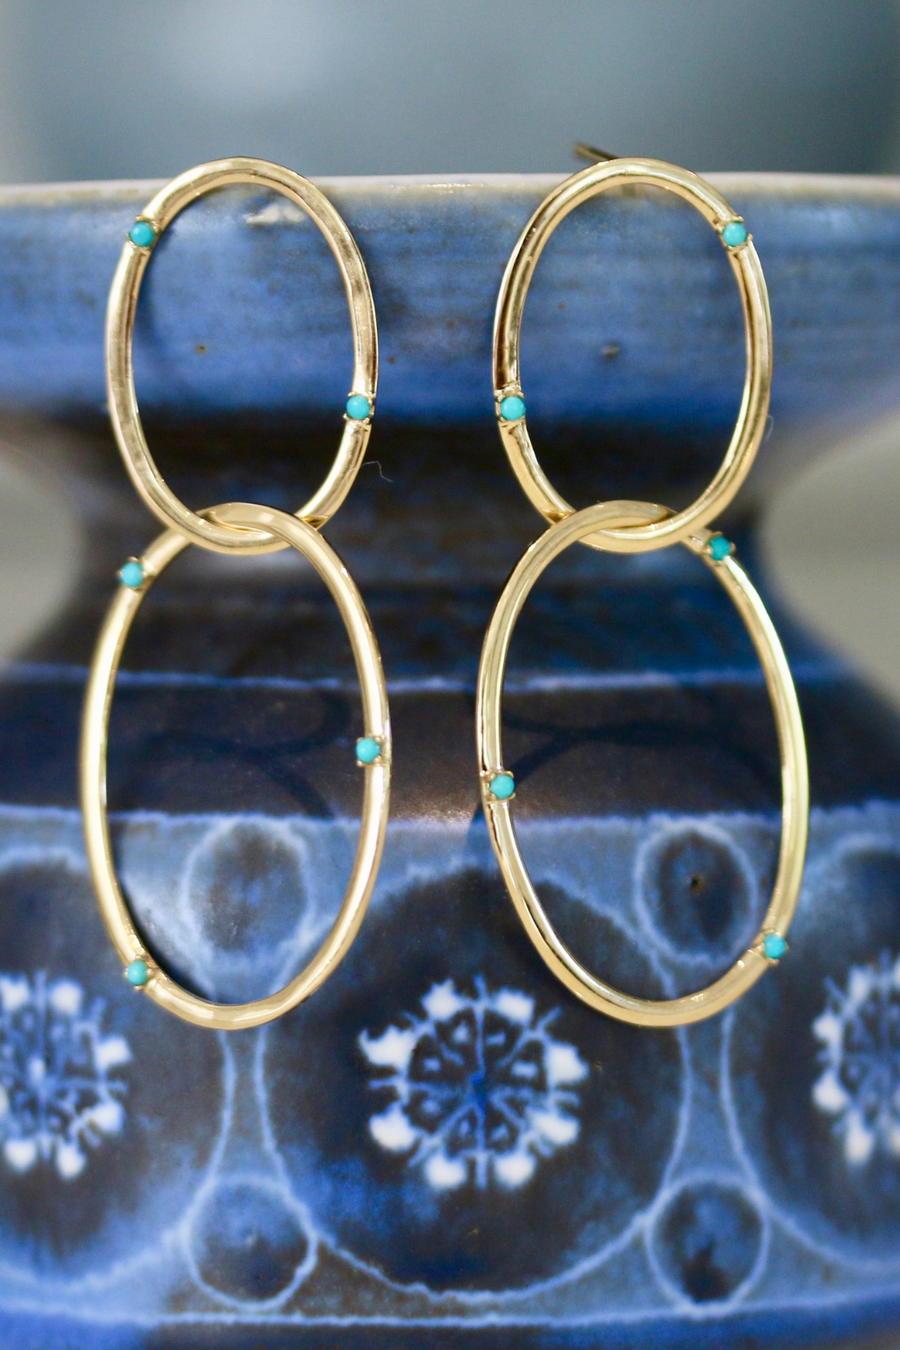 Turquoise 'Oh!' Earrings in 18k Gold